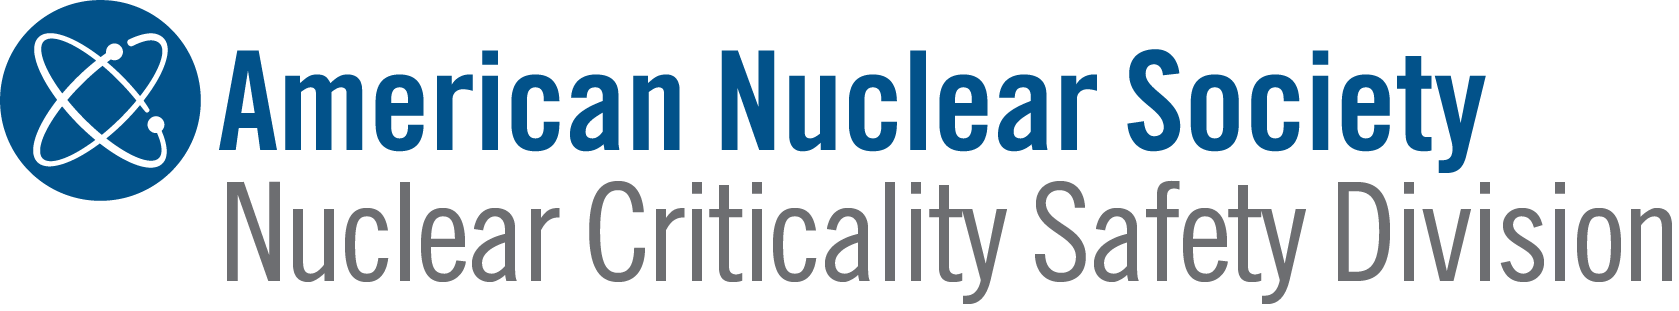 ANS Nuclear Criticality Safety Division